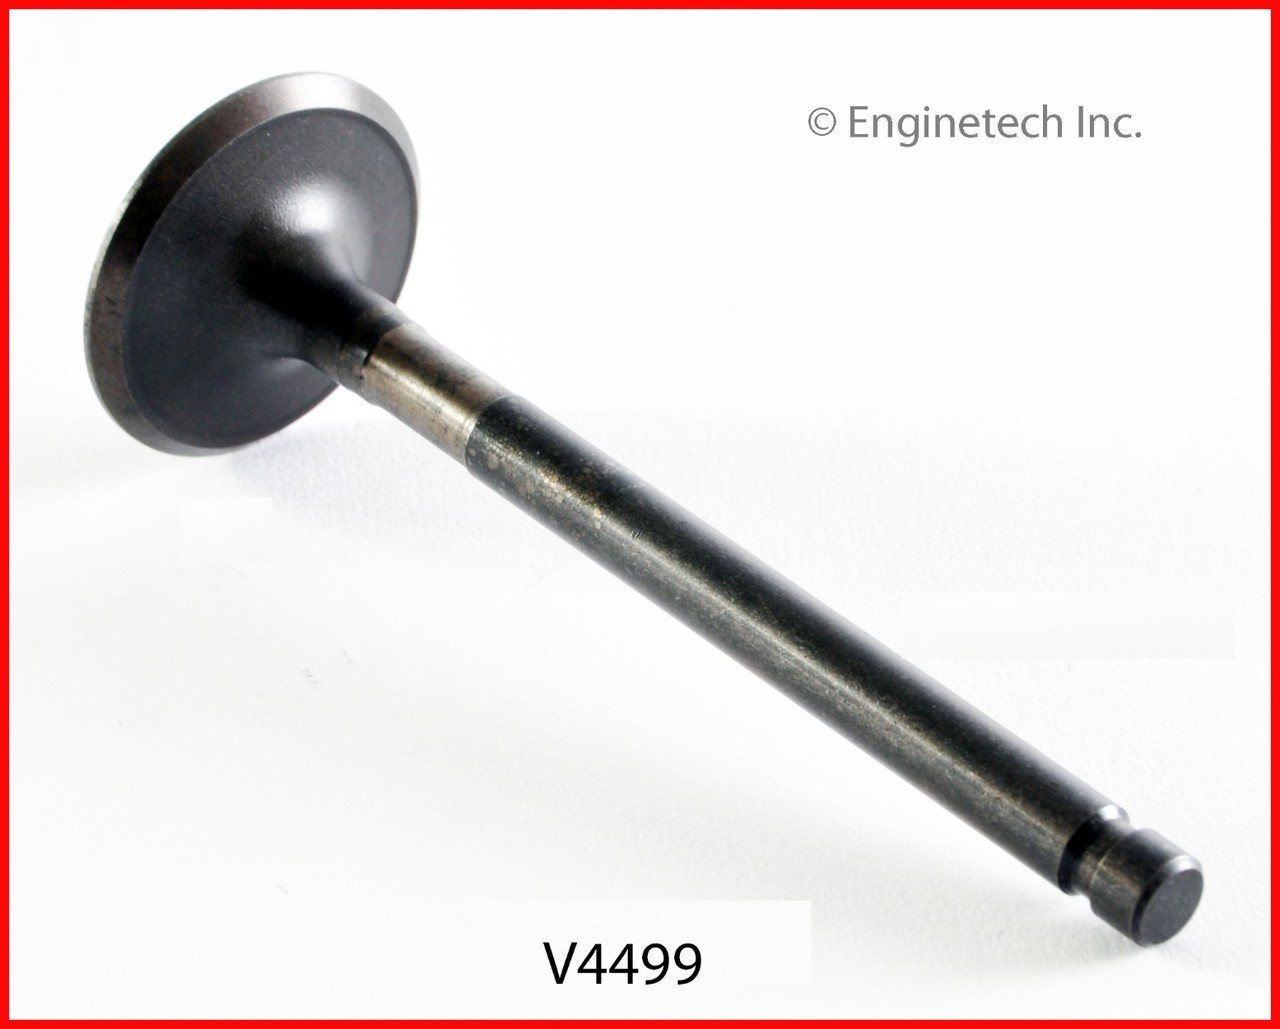 Exhaust Valve - 2011 Ford Mustang 3.7L (V4499.E41)